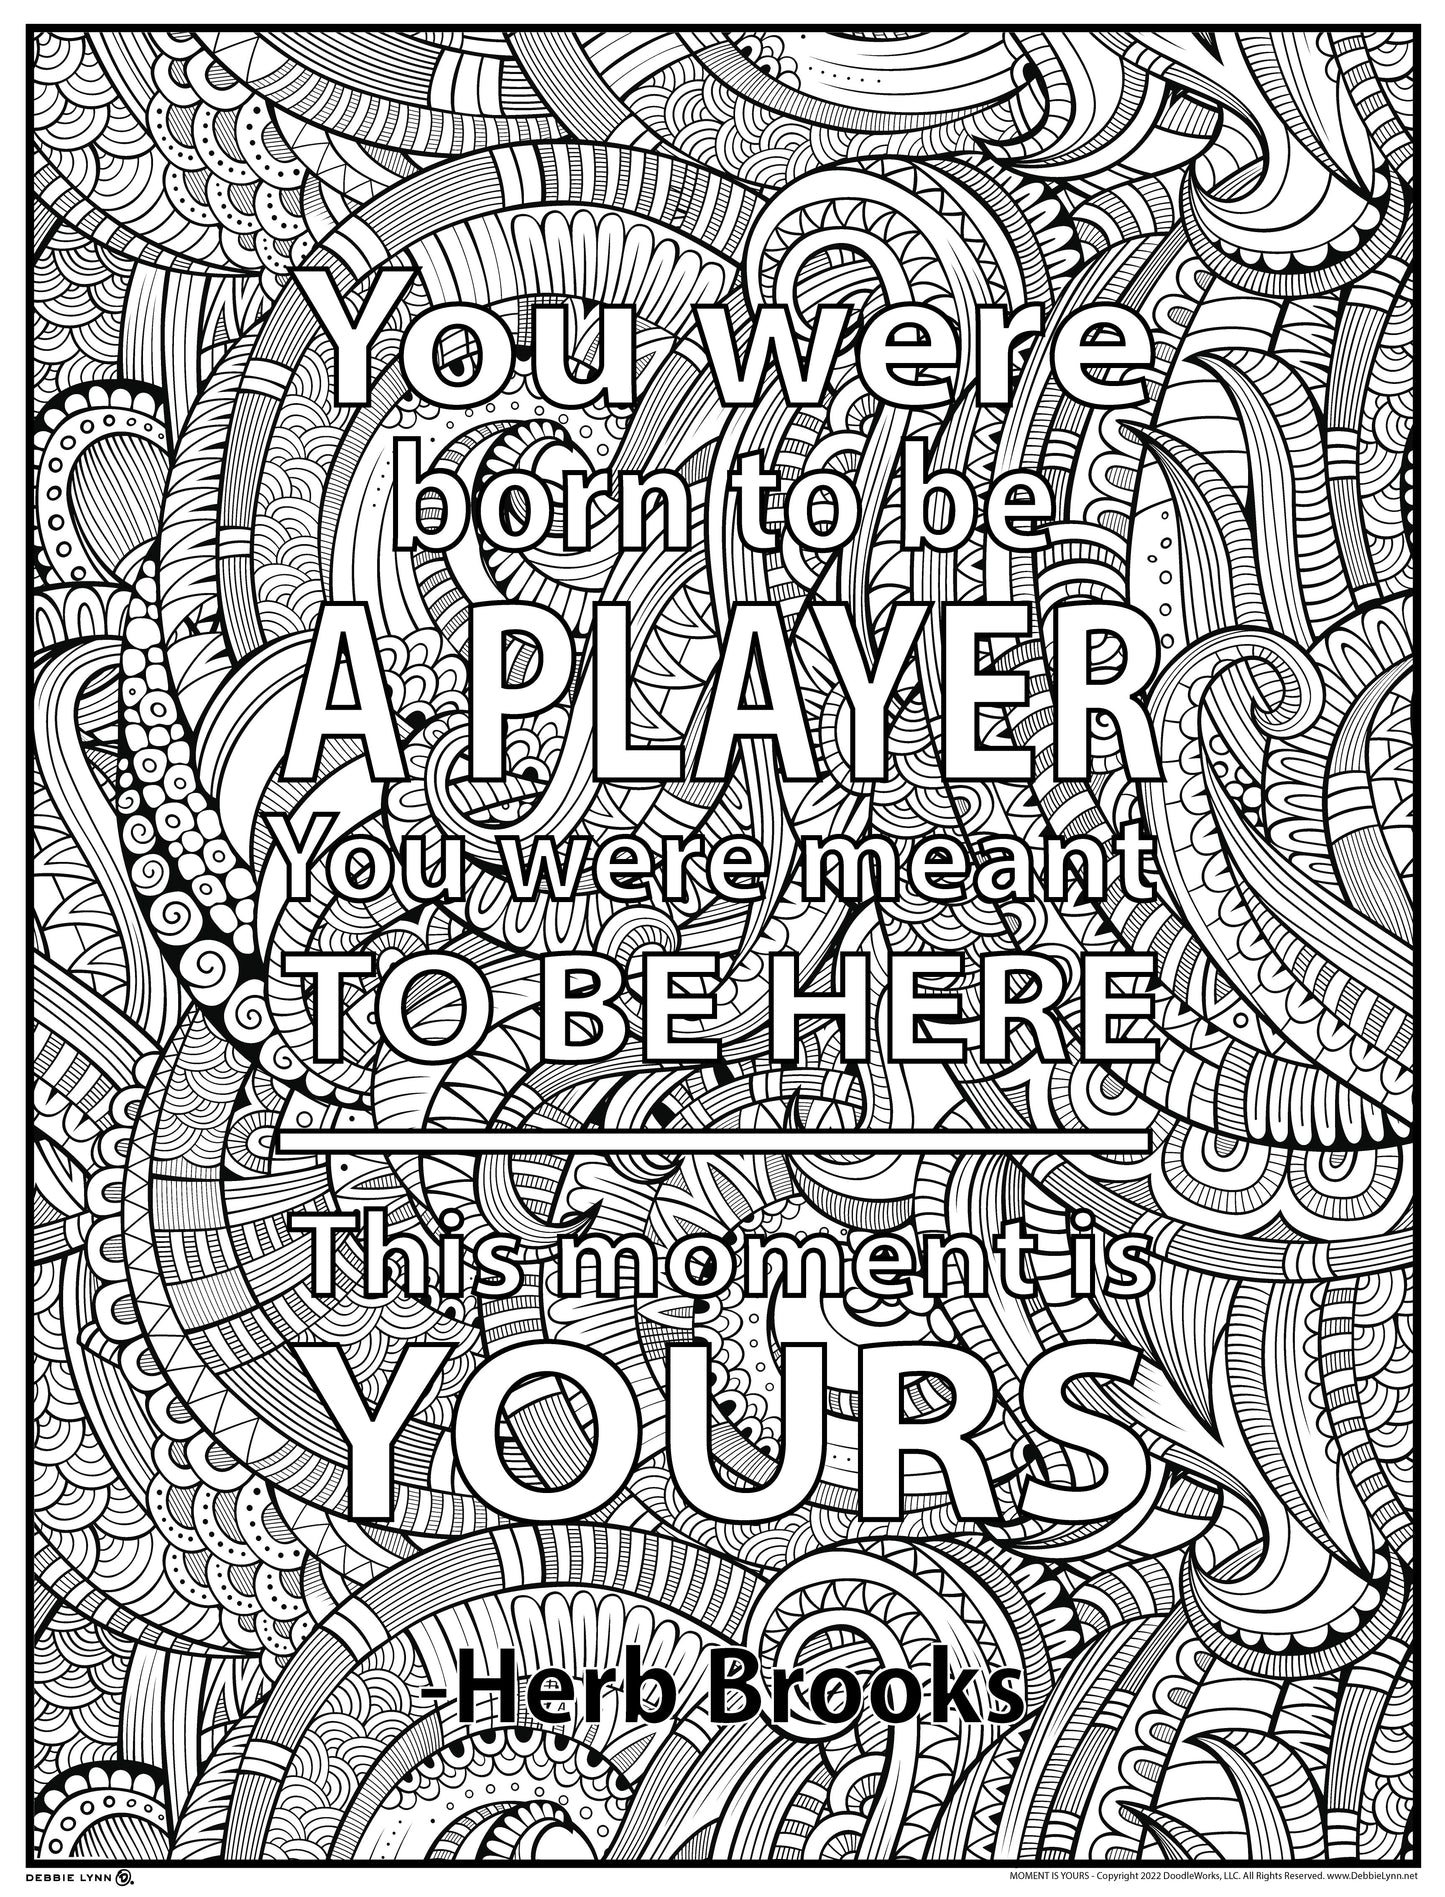 Dream Big Personalized Giant Coloring Poster 48x63